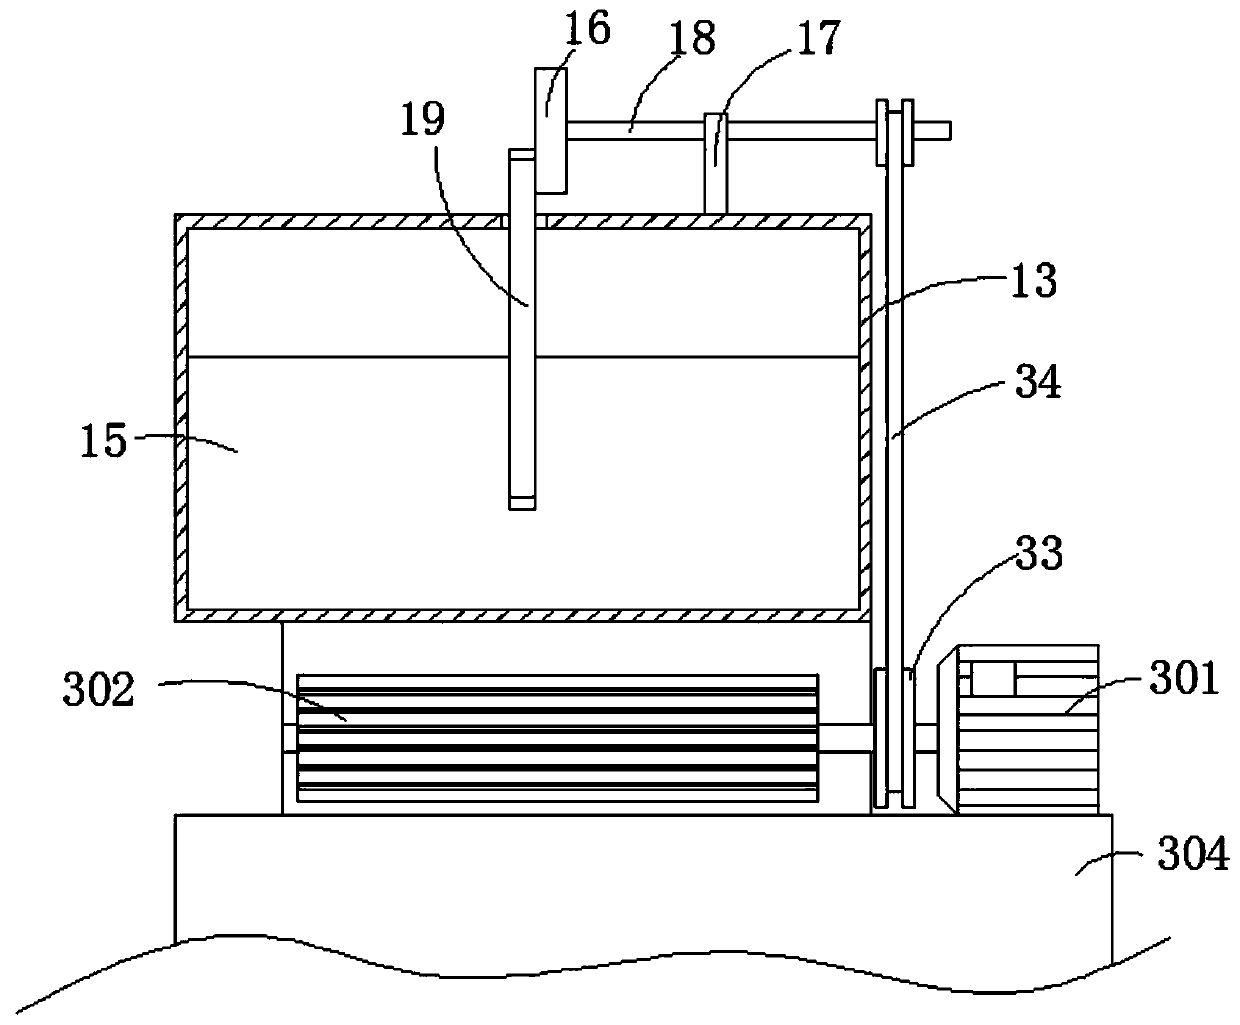 Garbage treatment device for environmental protection engineering